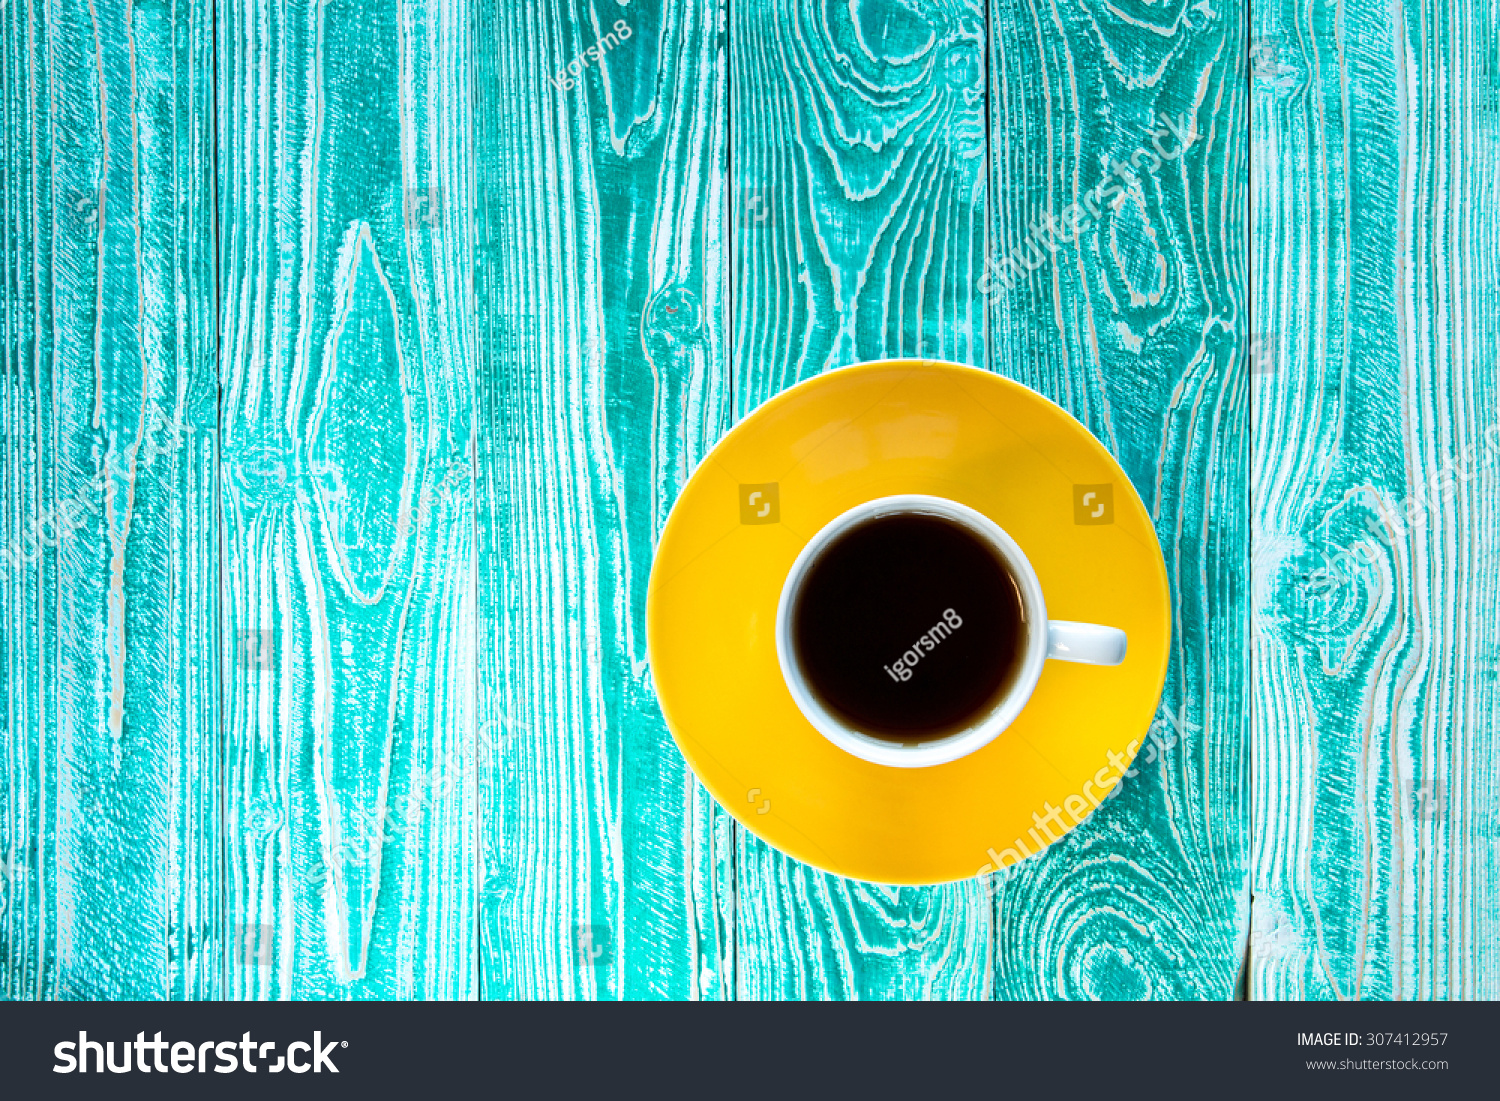 cup of black tea on yellow plate on turquoise colored old wooden table  top view #307412957